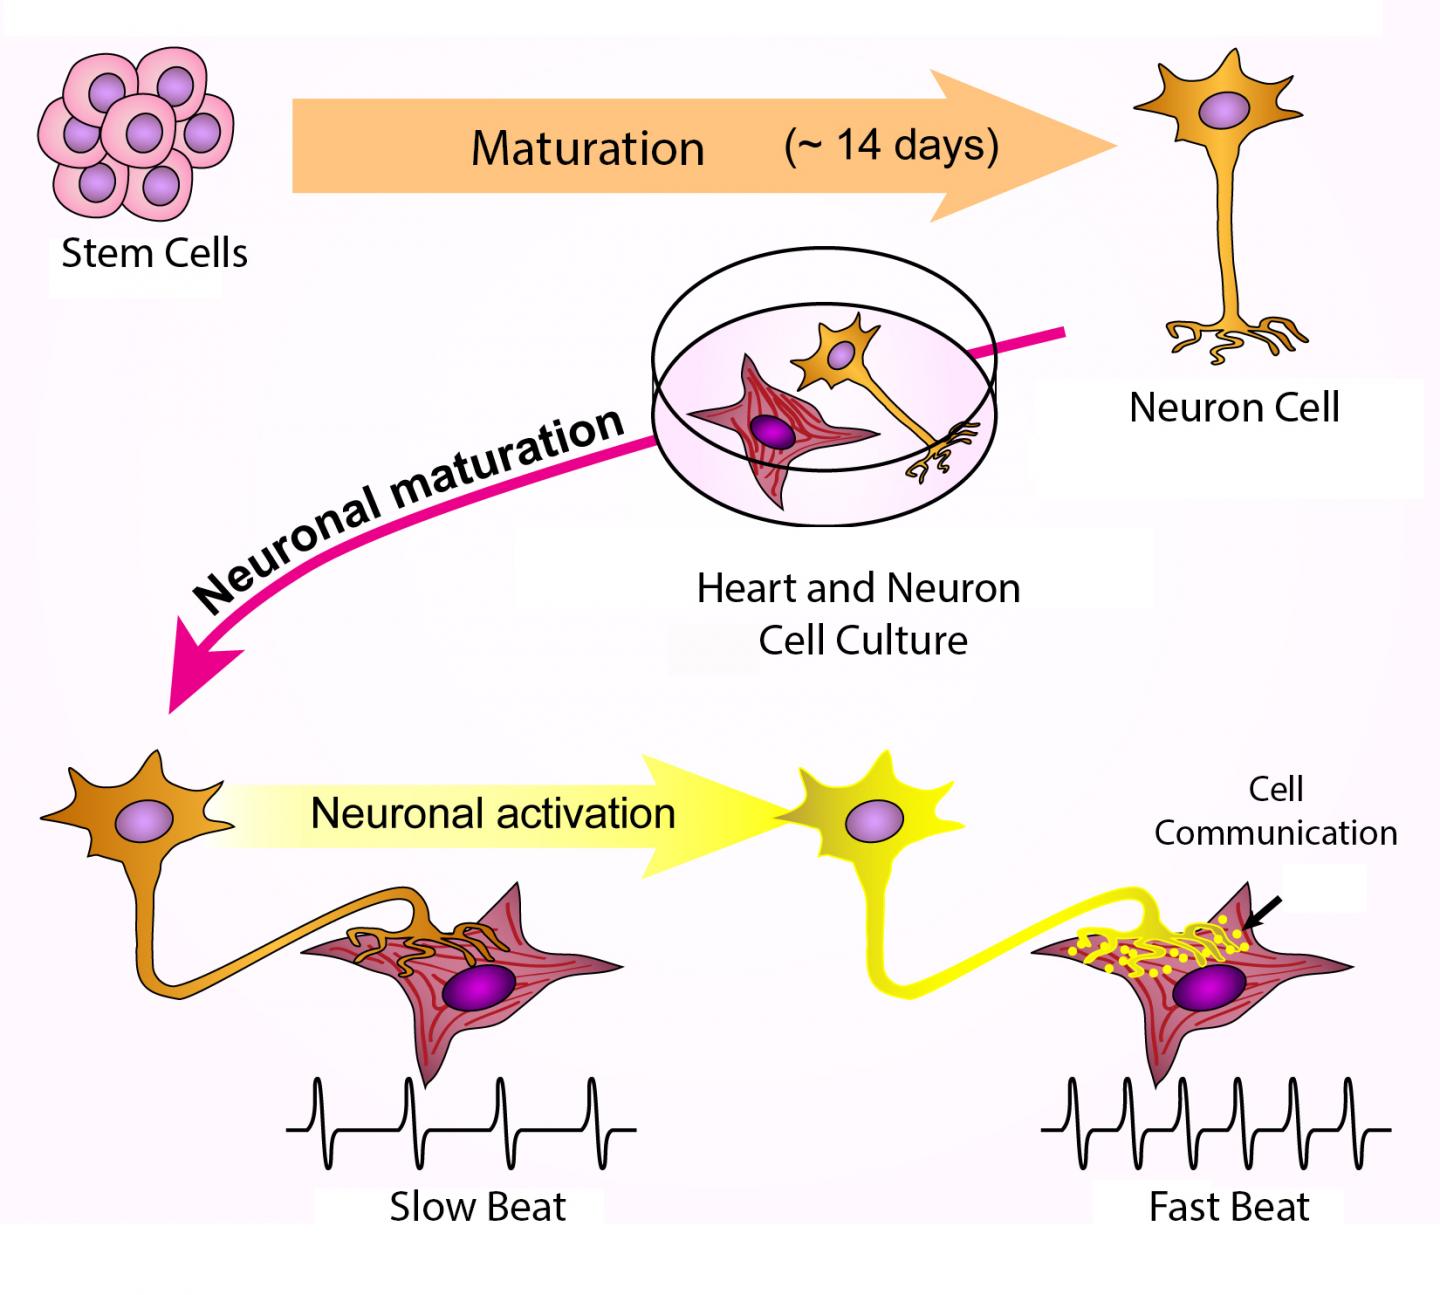 Nerve Cell-Heart Cell Connections Benefit Both Types of Cells